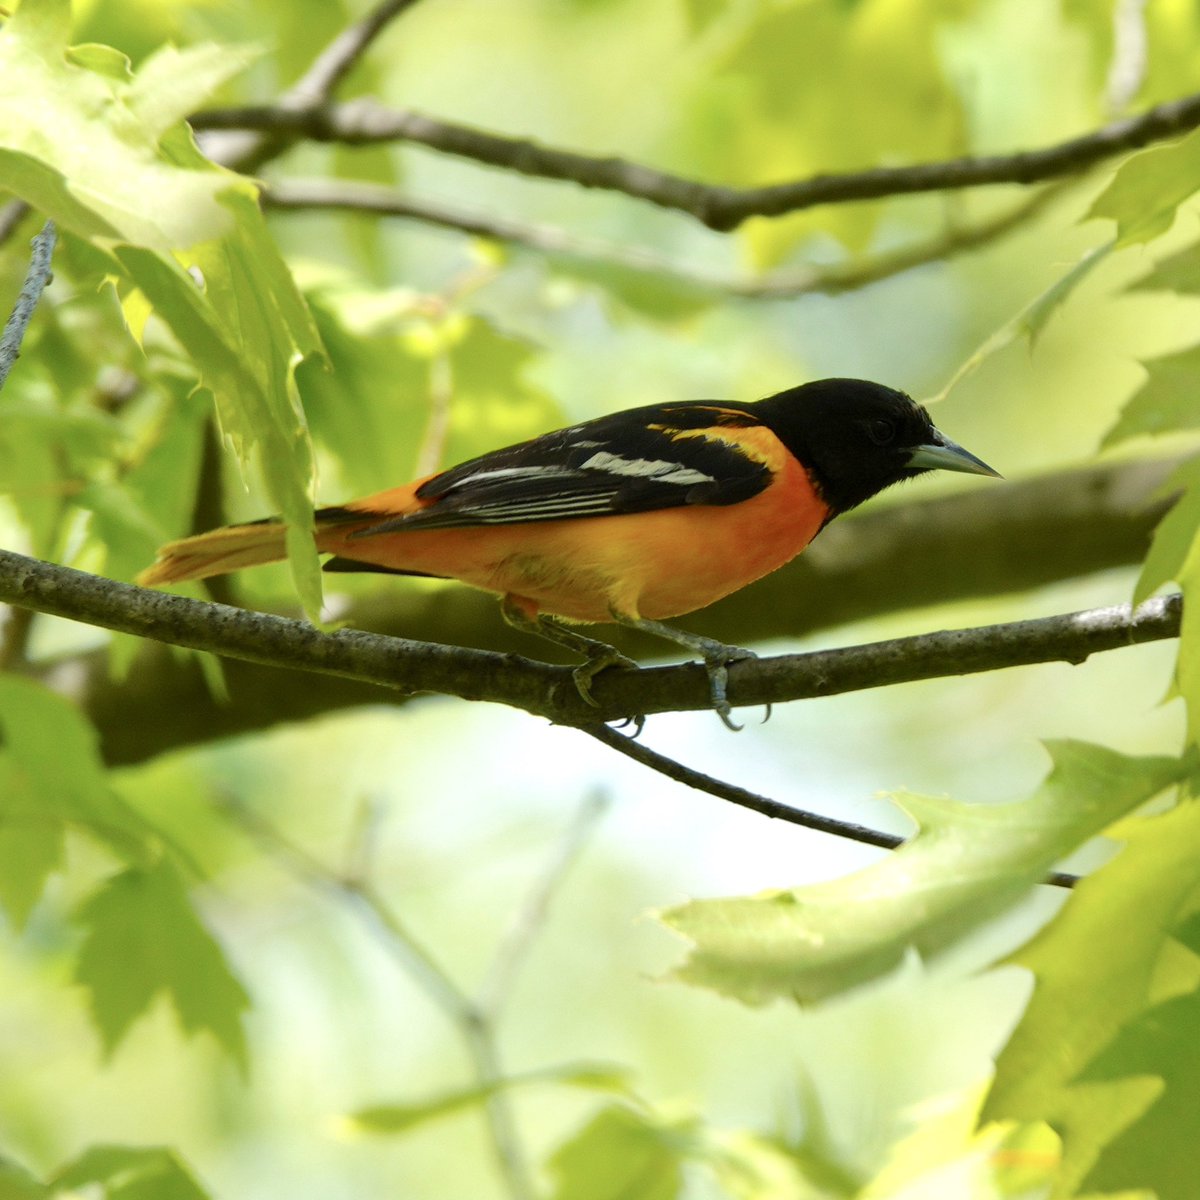 Baltimore Oriole dropped down for a clear look #baltimoreoriole #oriole #birding #birdphotography #songbirds #springmigration #natgeo #centralpark #wildlifephotography #shotoftheday #birdwatching #birdcp #birdcpp #birdnerd #birds #birdphotos #nature #natgeowild #naturephotography